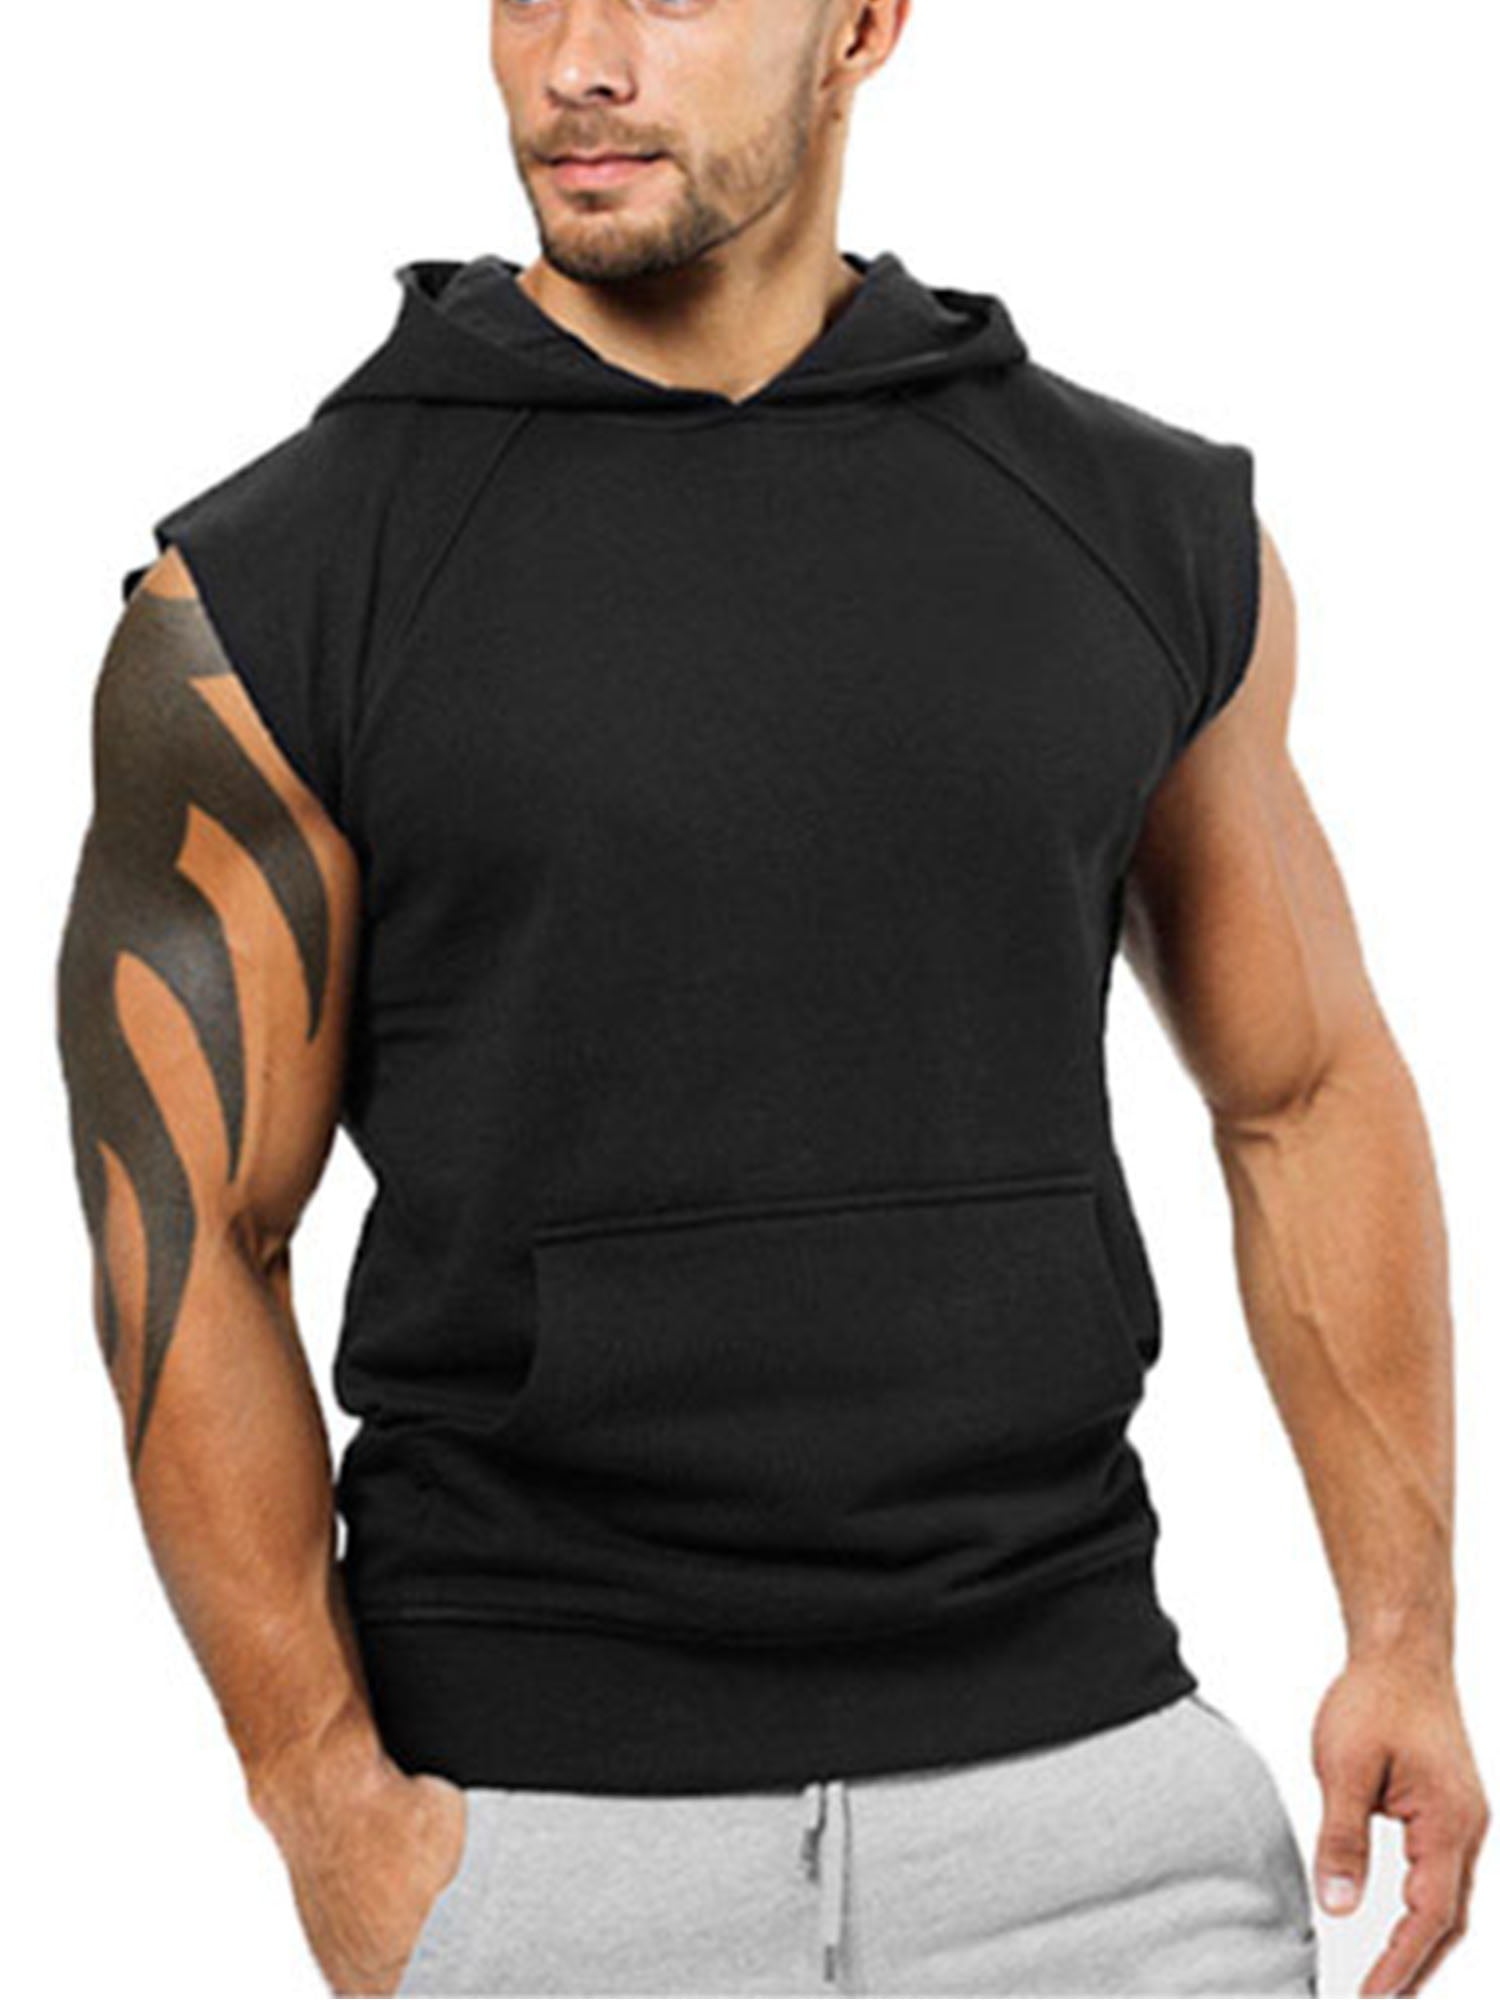 Men's Gym Vest Sleeveless Pullover Hoody Hooded Tank Tops Muscle Clothes Clothes 